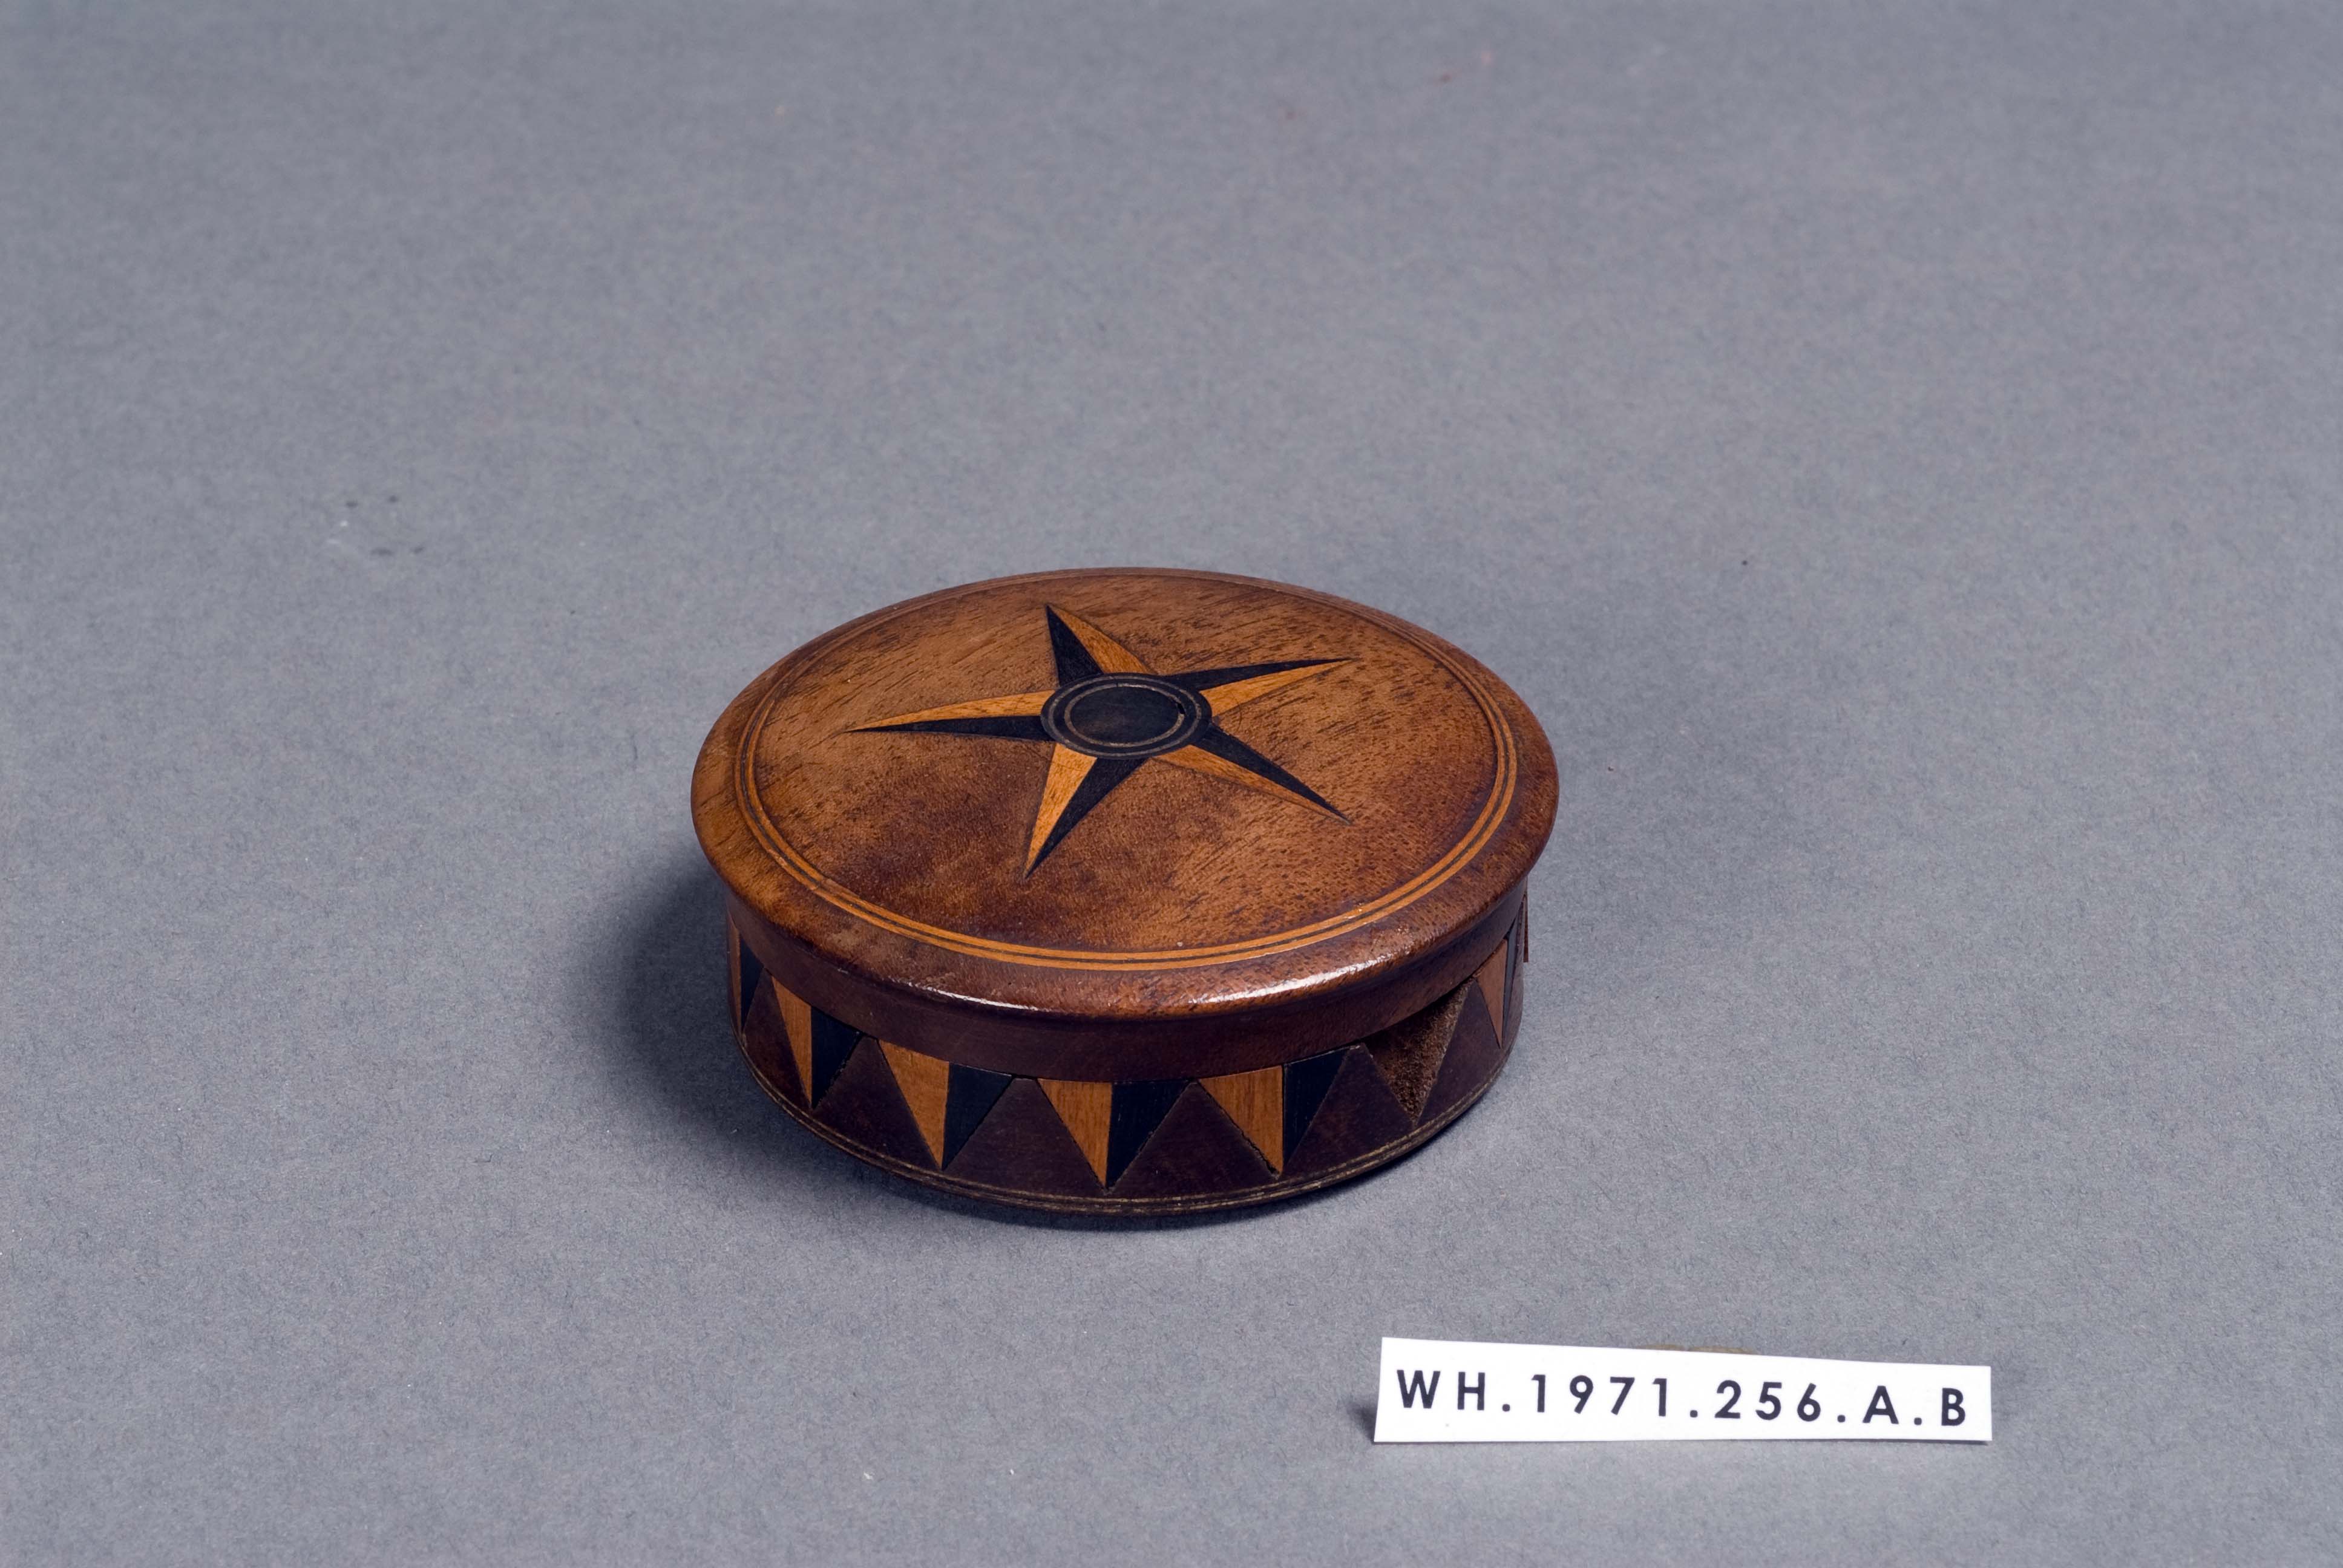 a round wooden box with a star design